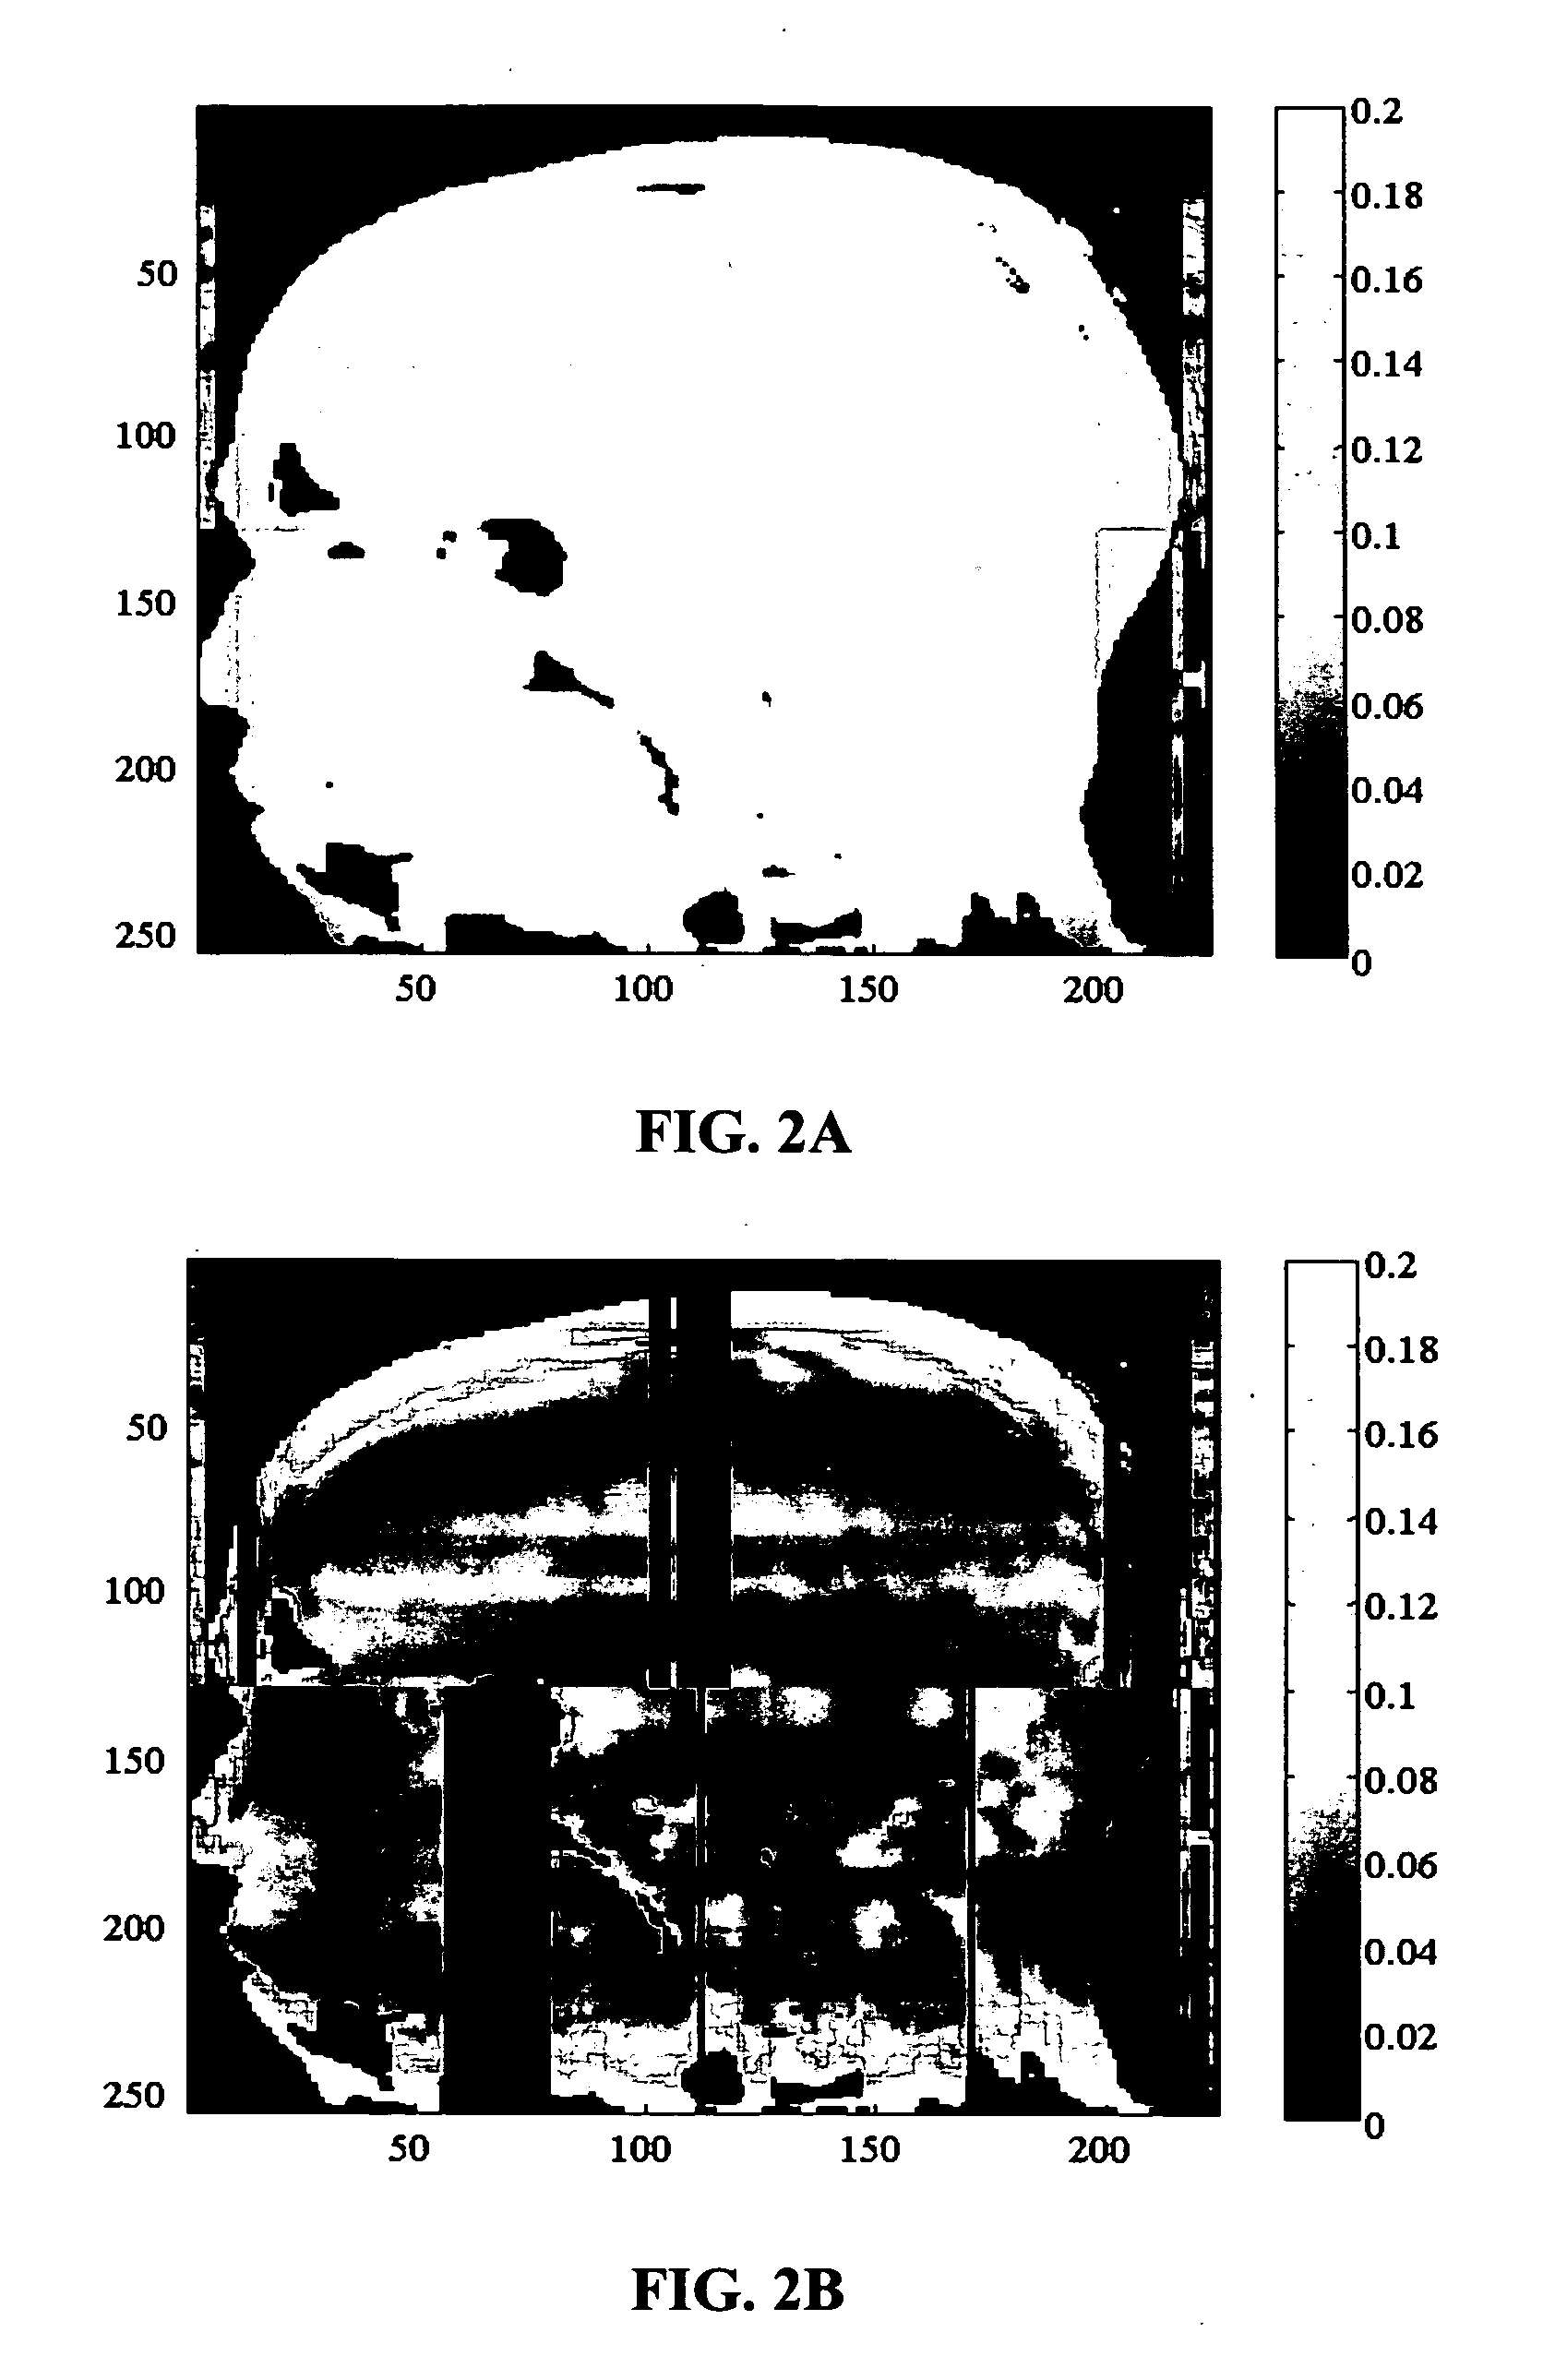 Method and apparatus for reconstruction of an image in image space using basis functions (RIB) for partially parallel imaging